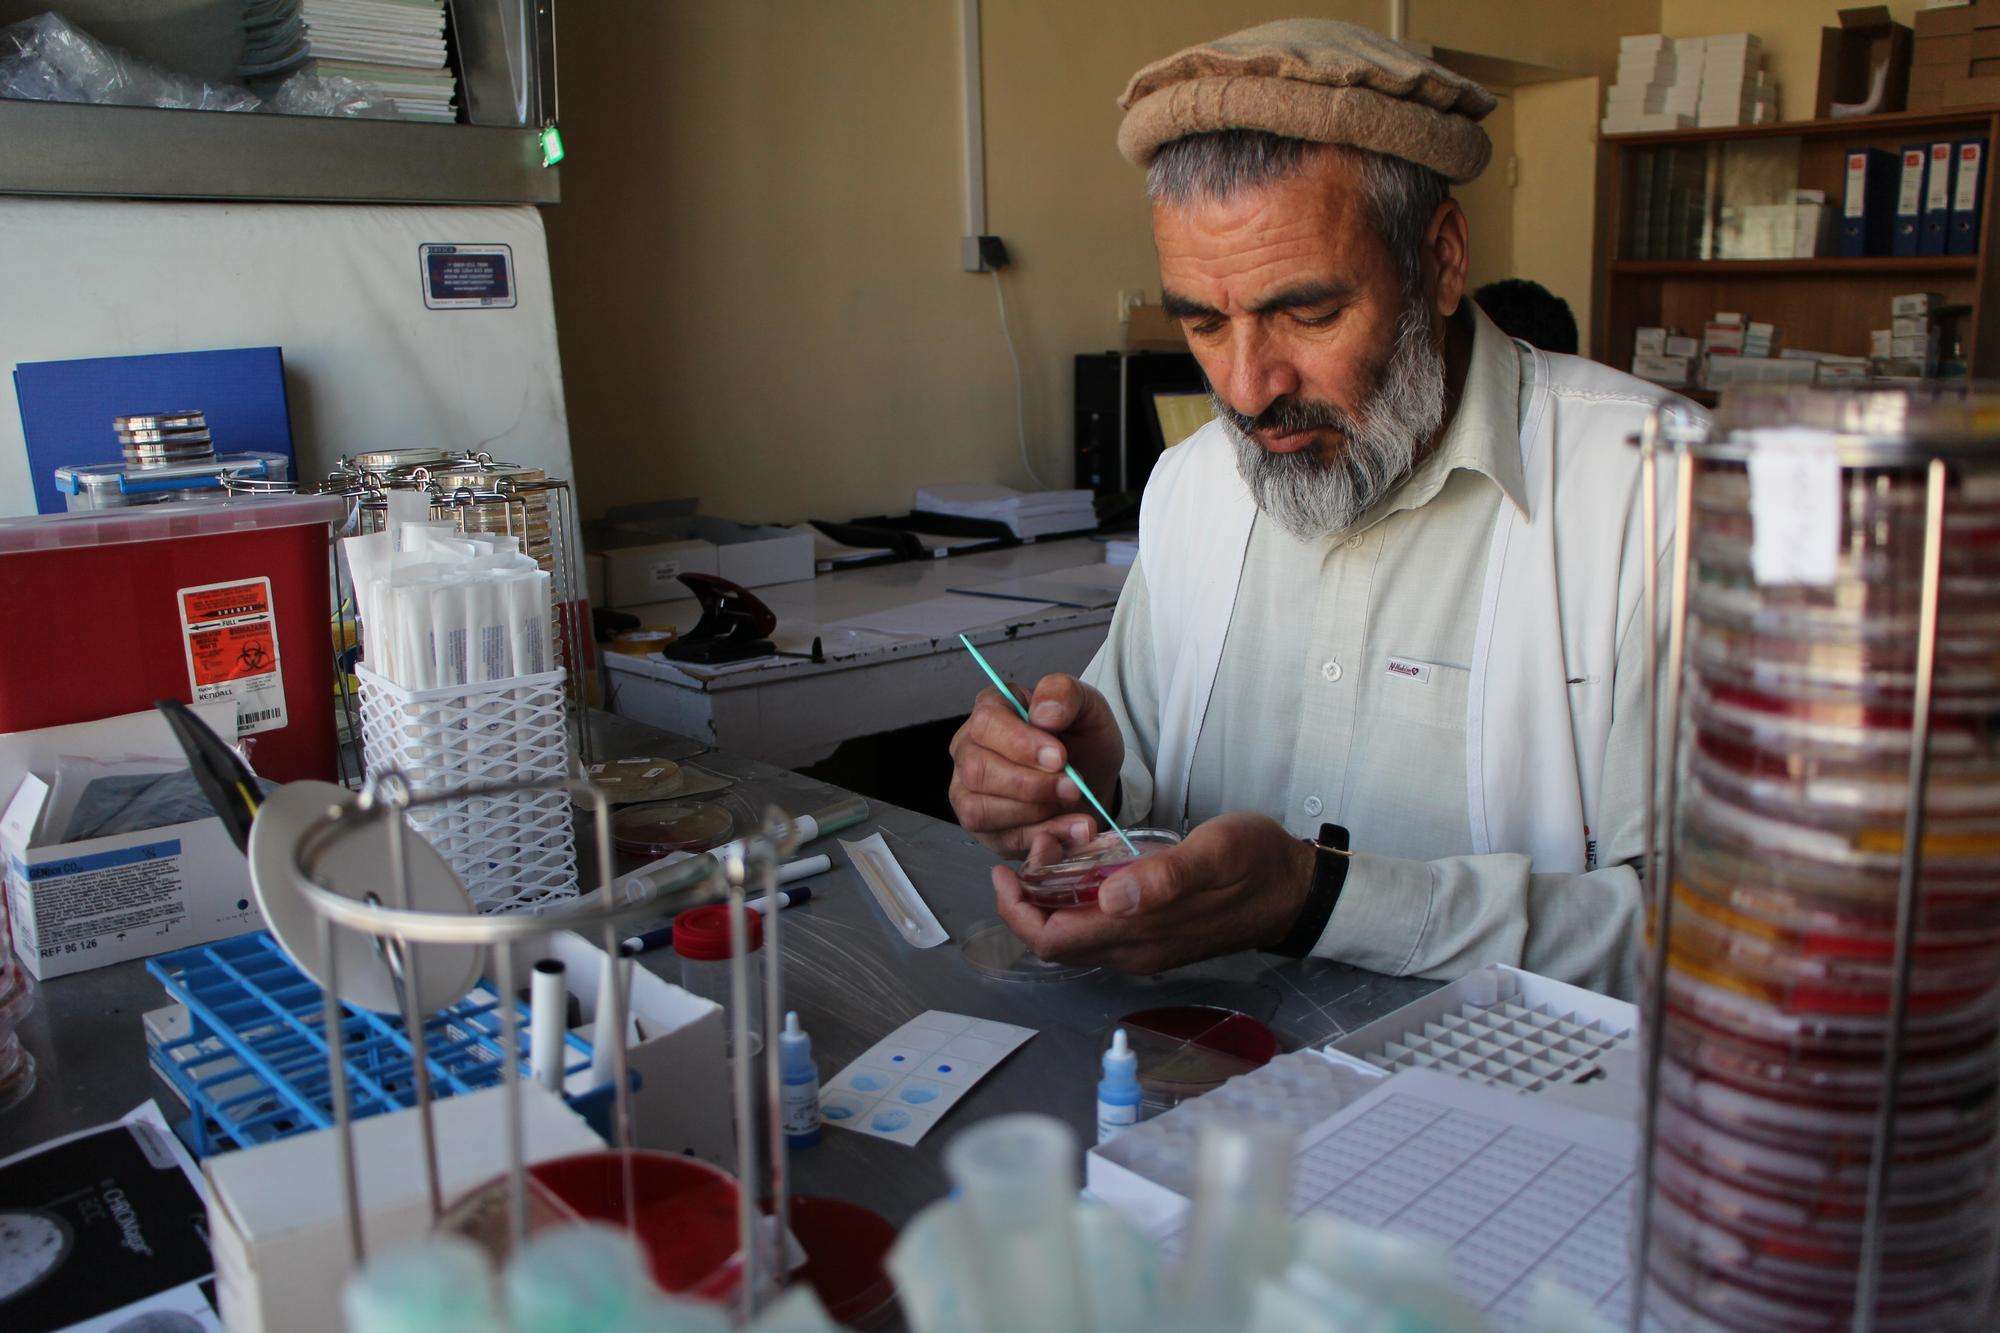 Dr Wardak Abdul Qayoum assists the expat microbiologist in supervising the team and carrying out isolation, identification and sensitivity testing of the 3000 bacterial strains expected. He uses a plastic loop to take a colony of bacteria from the culture plate.